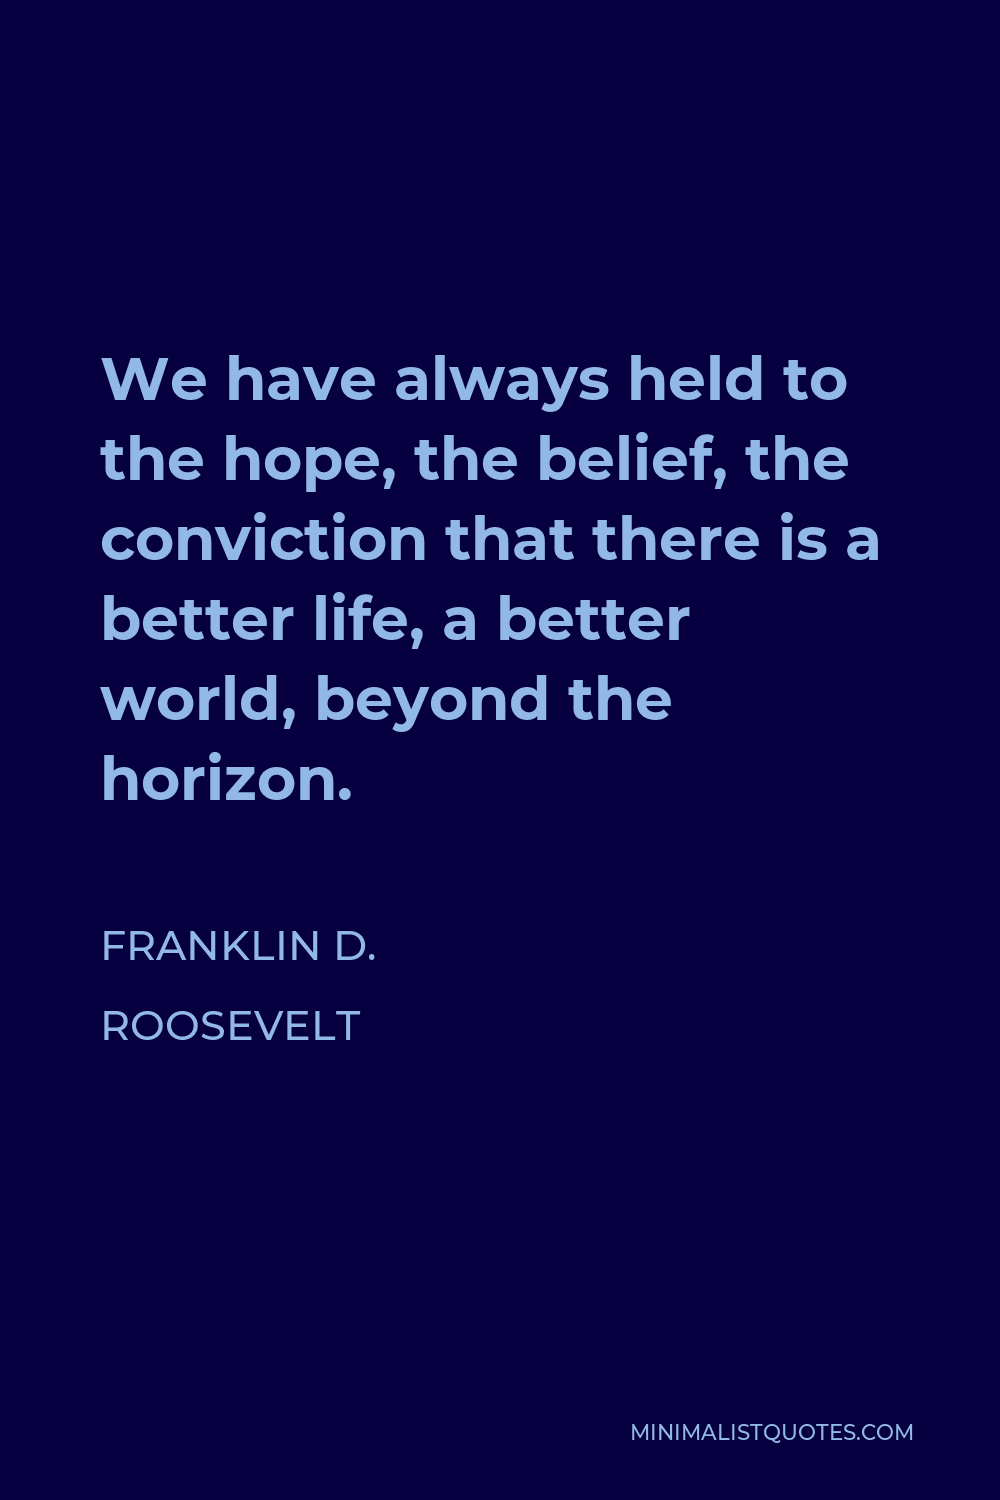 Franklin D. Roosevelt Quote - We have always held to the hope, the belief, the conviction that there is a better life, a better world, beyond the horizon.